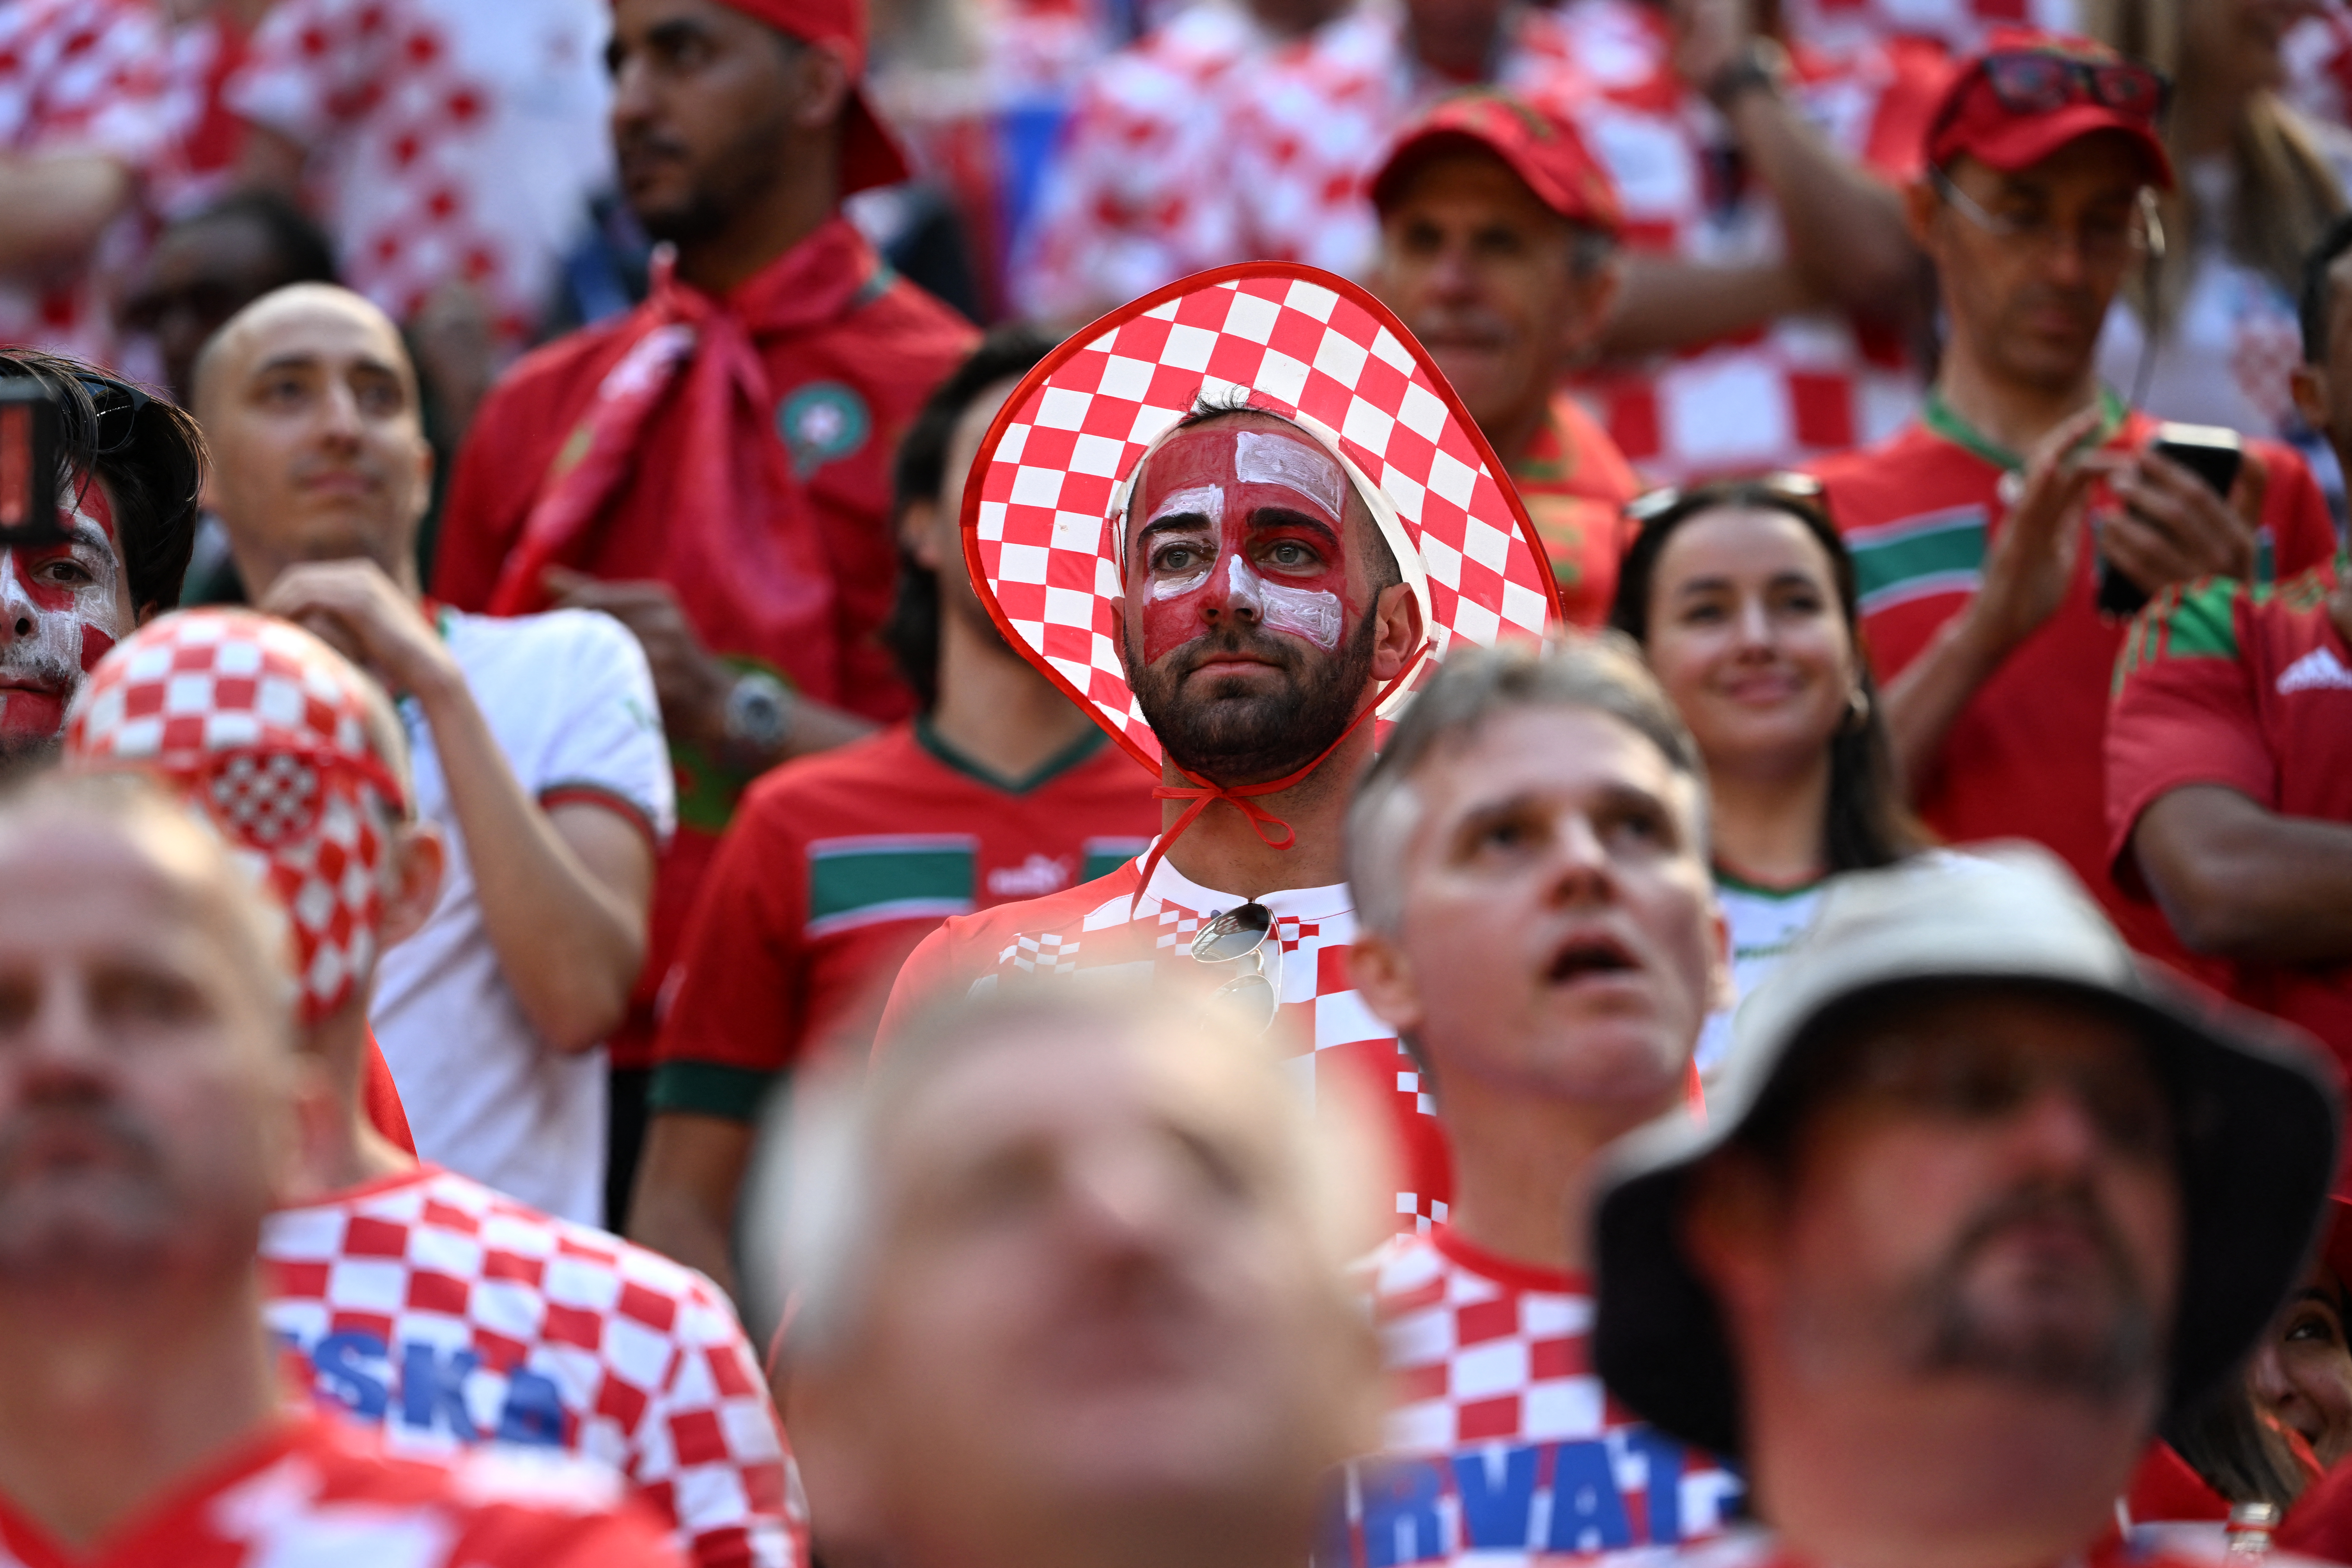 Fans of Croatia wait on the stands ahead of the Qatar 2022 World Cup Group F football match between Morocco and Croatia at the Al-Bayt Stadium in Al Khor, north of Doha on November 23, 2022. (Photo by OZAN KOSE / AFP)